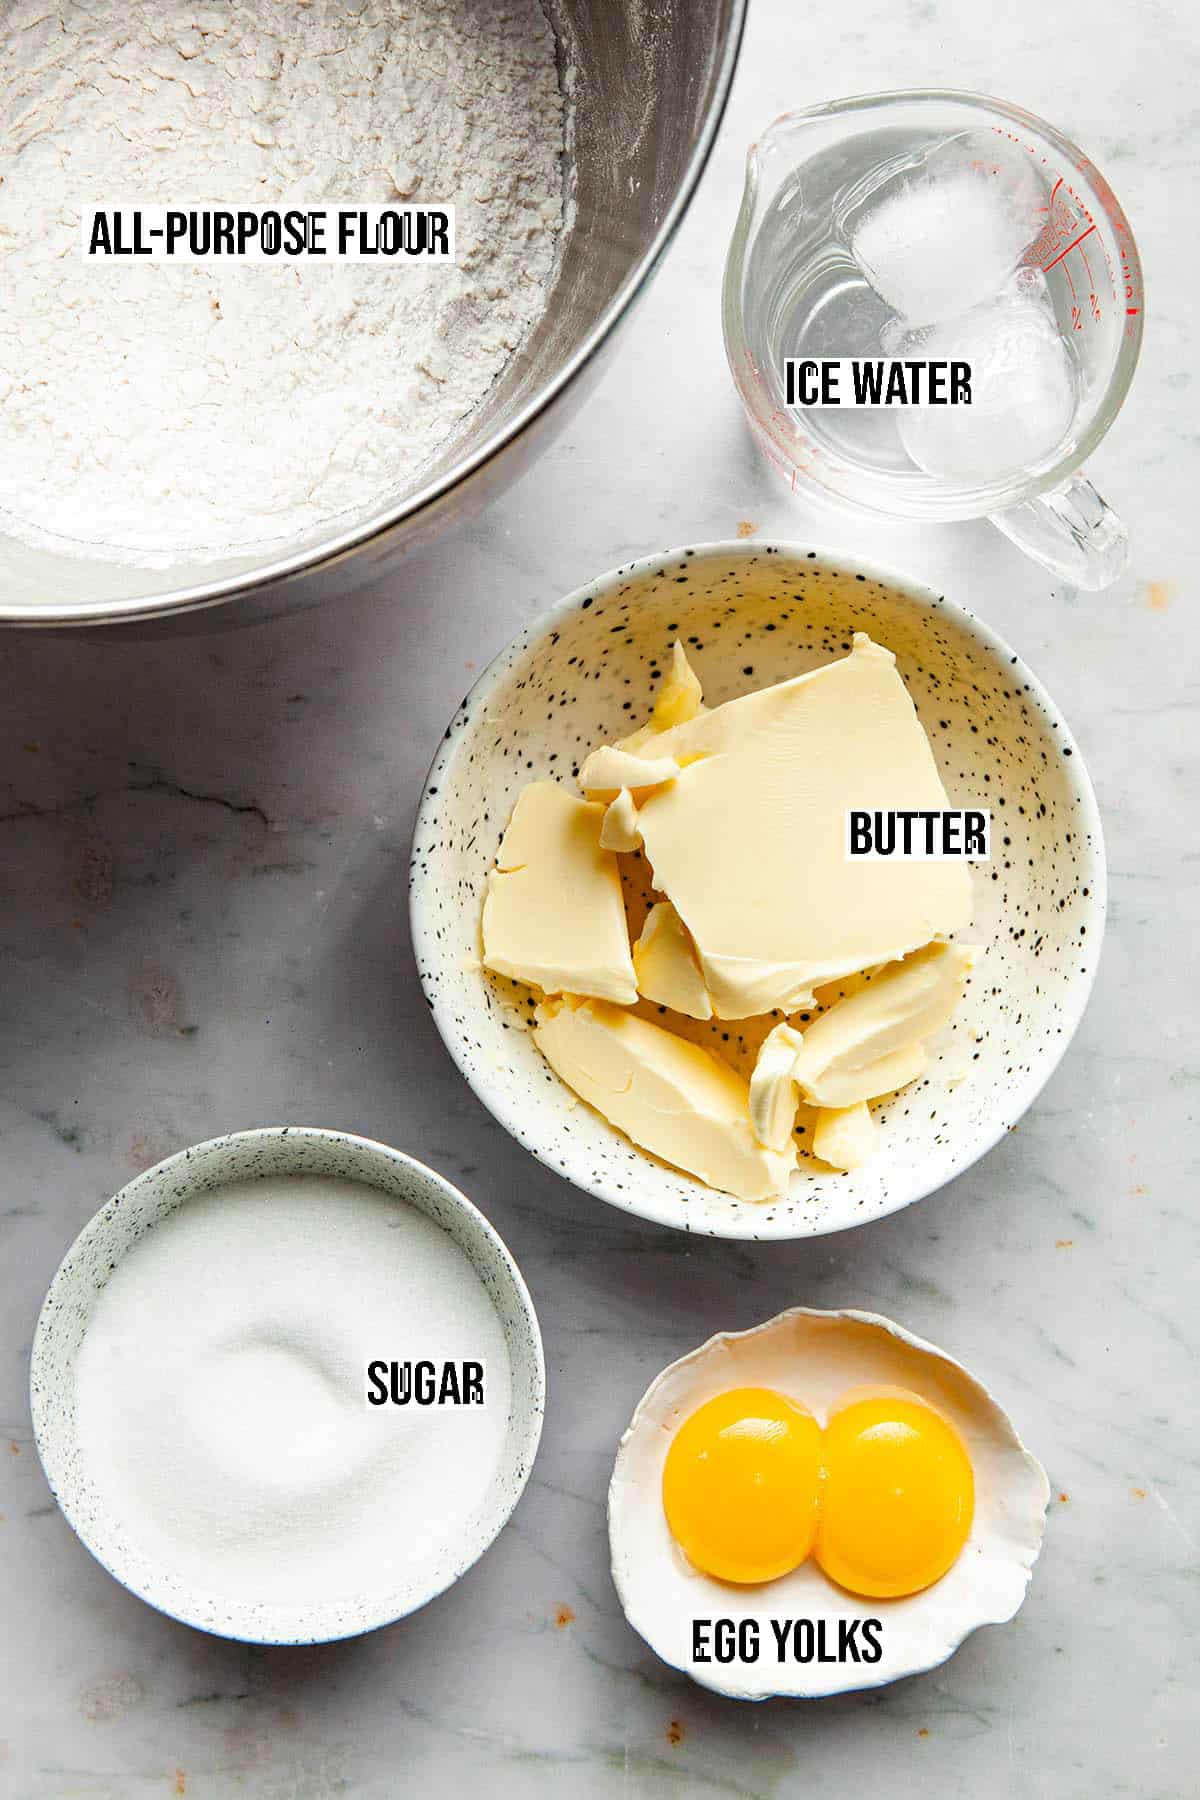 Sweet shortcrust pastry ingredients with labels.